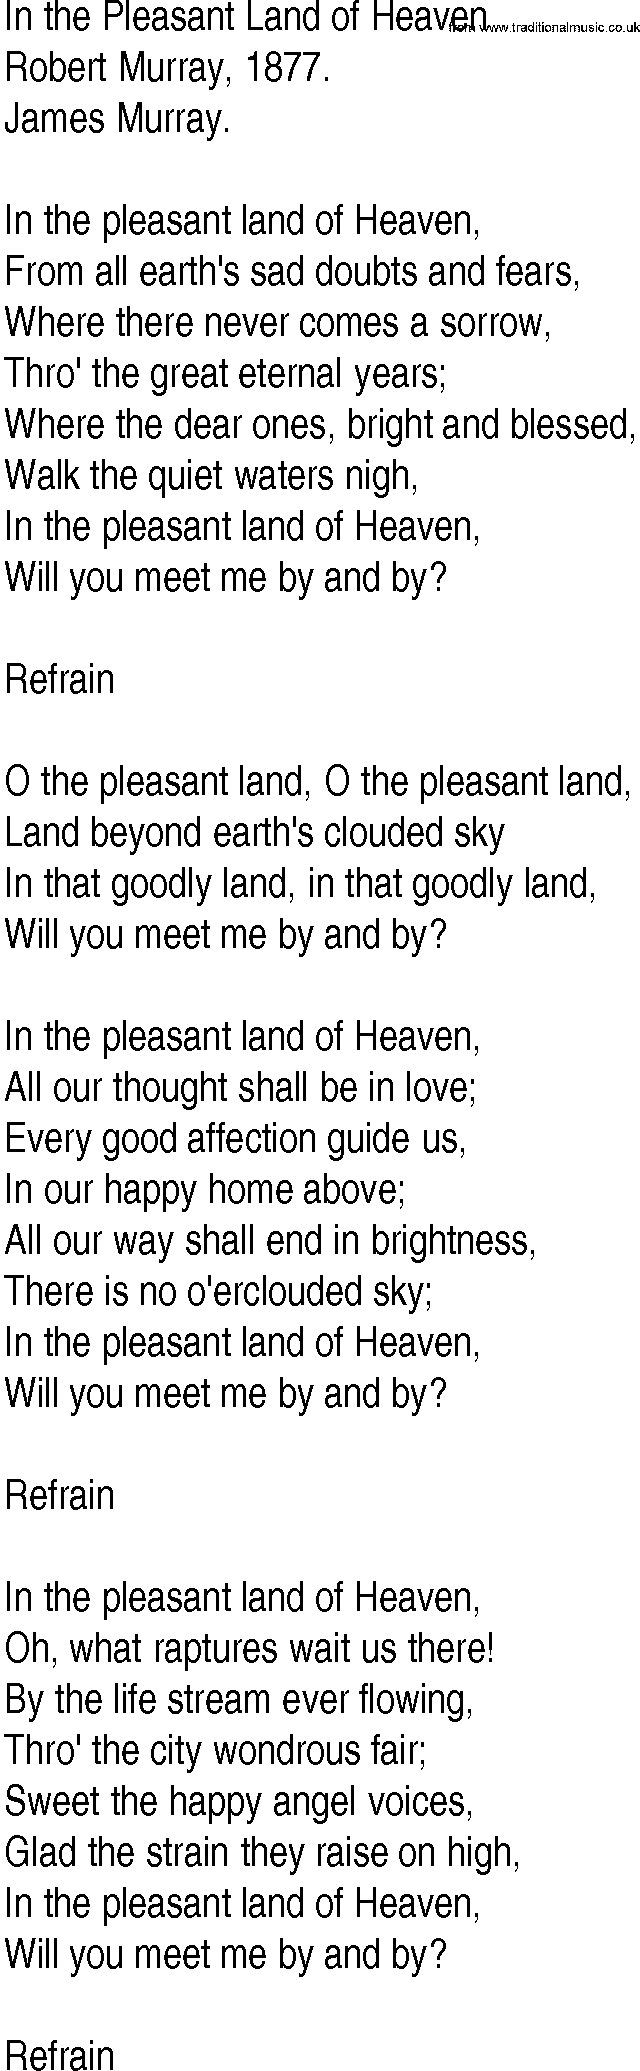 Hymn and Gospel Song: In the Pleasant Land of Heaven by Robert Murray lyrics